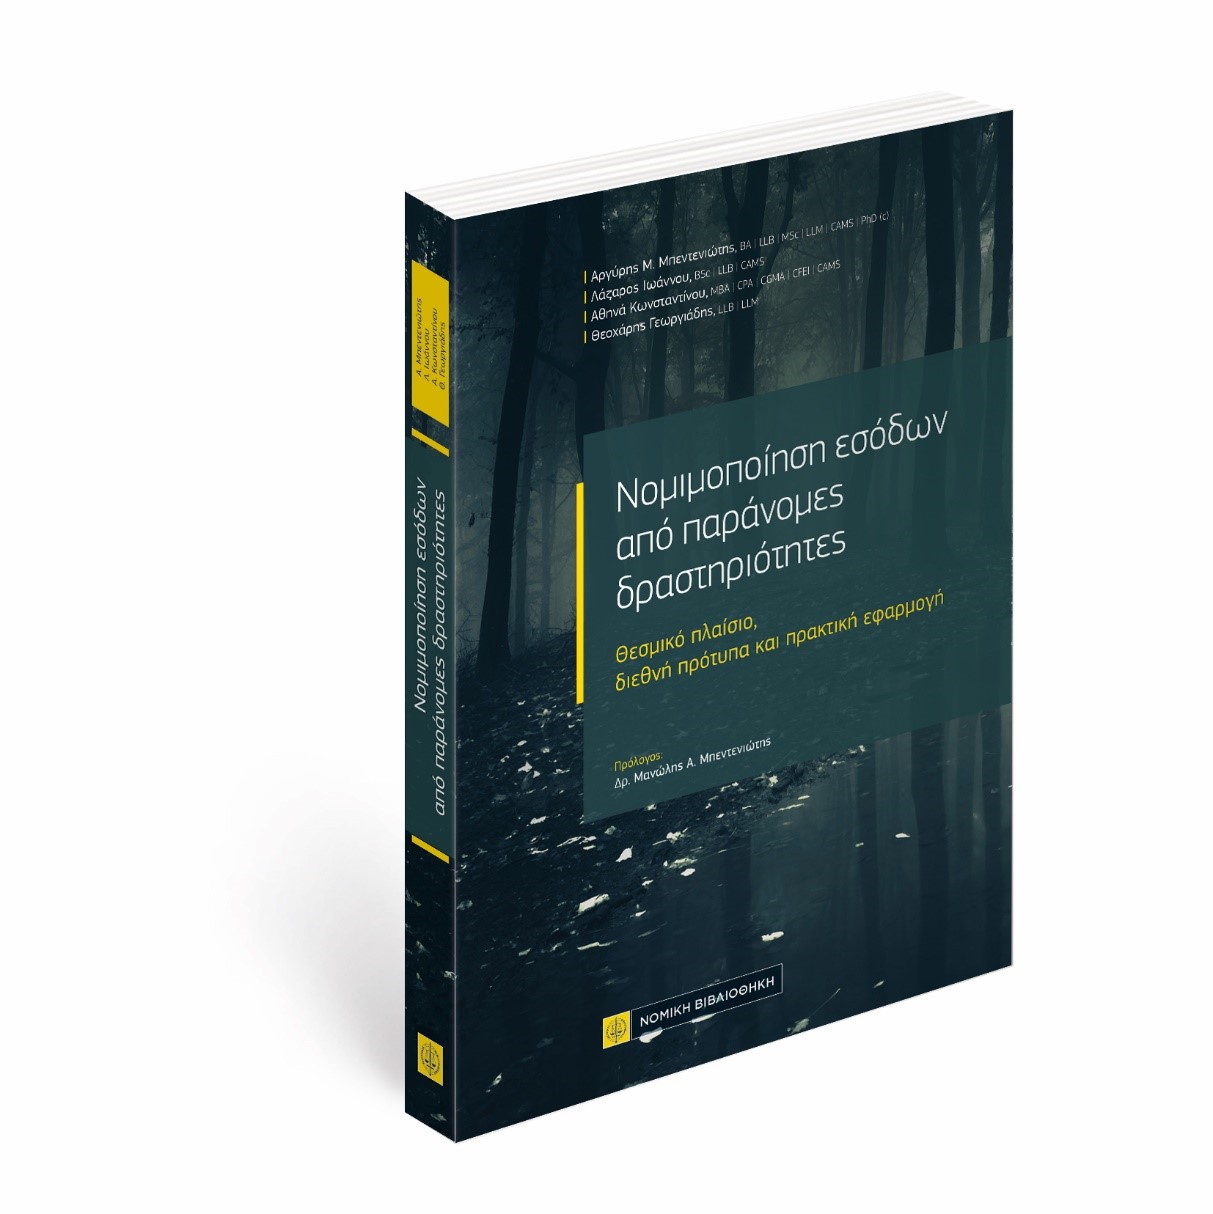 Book Launch Announcement – Money laundering, Institutional framework, international standards and practical implementation